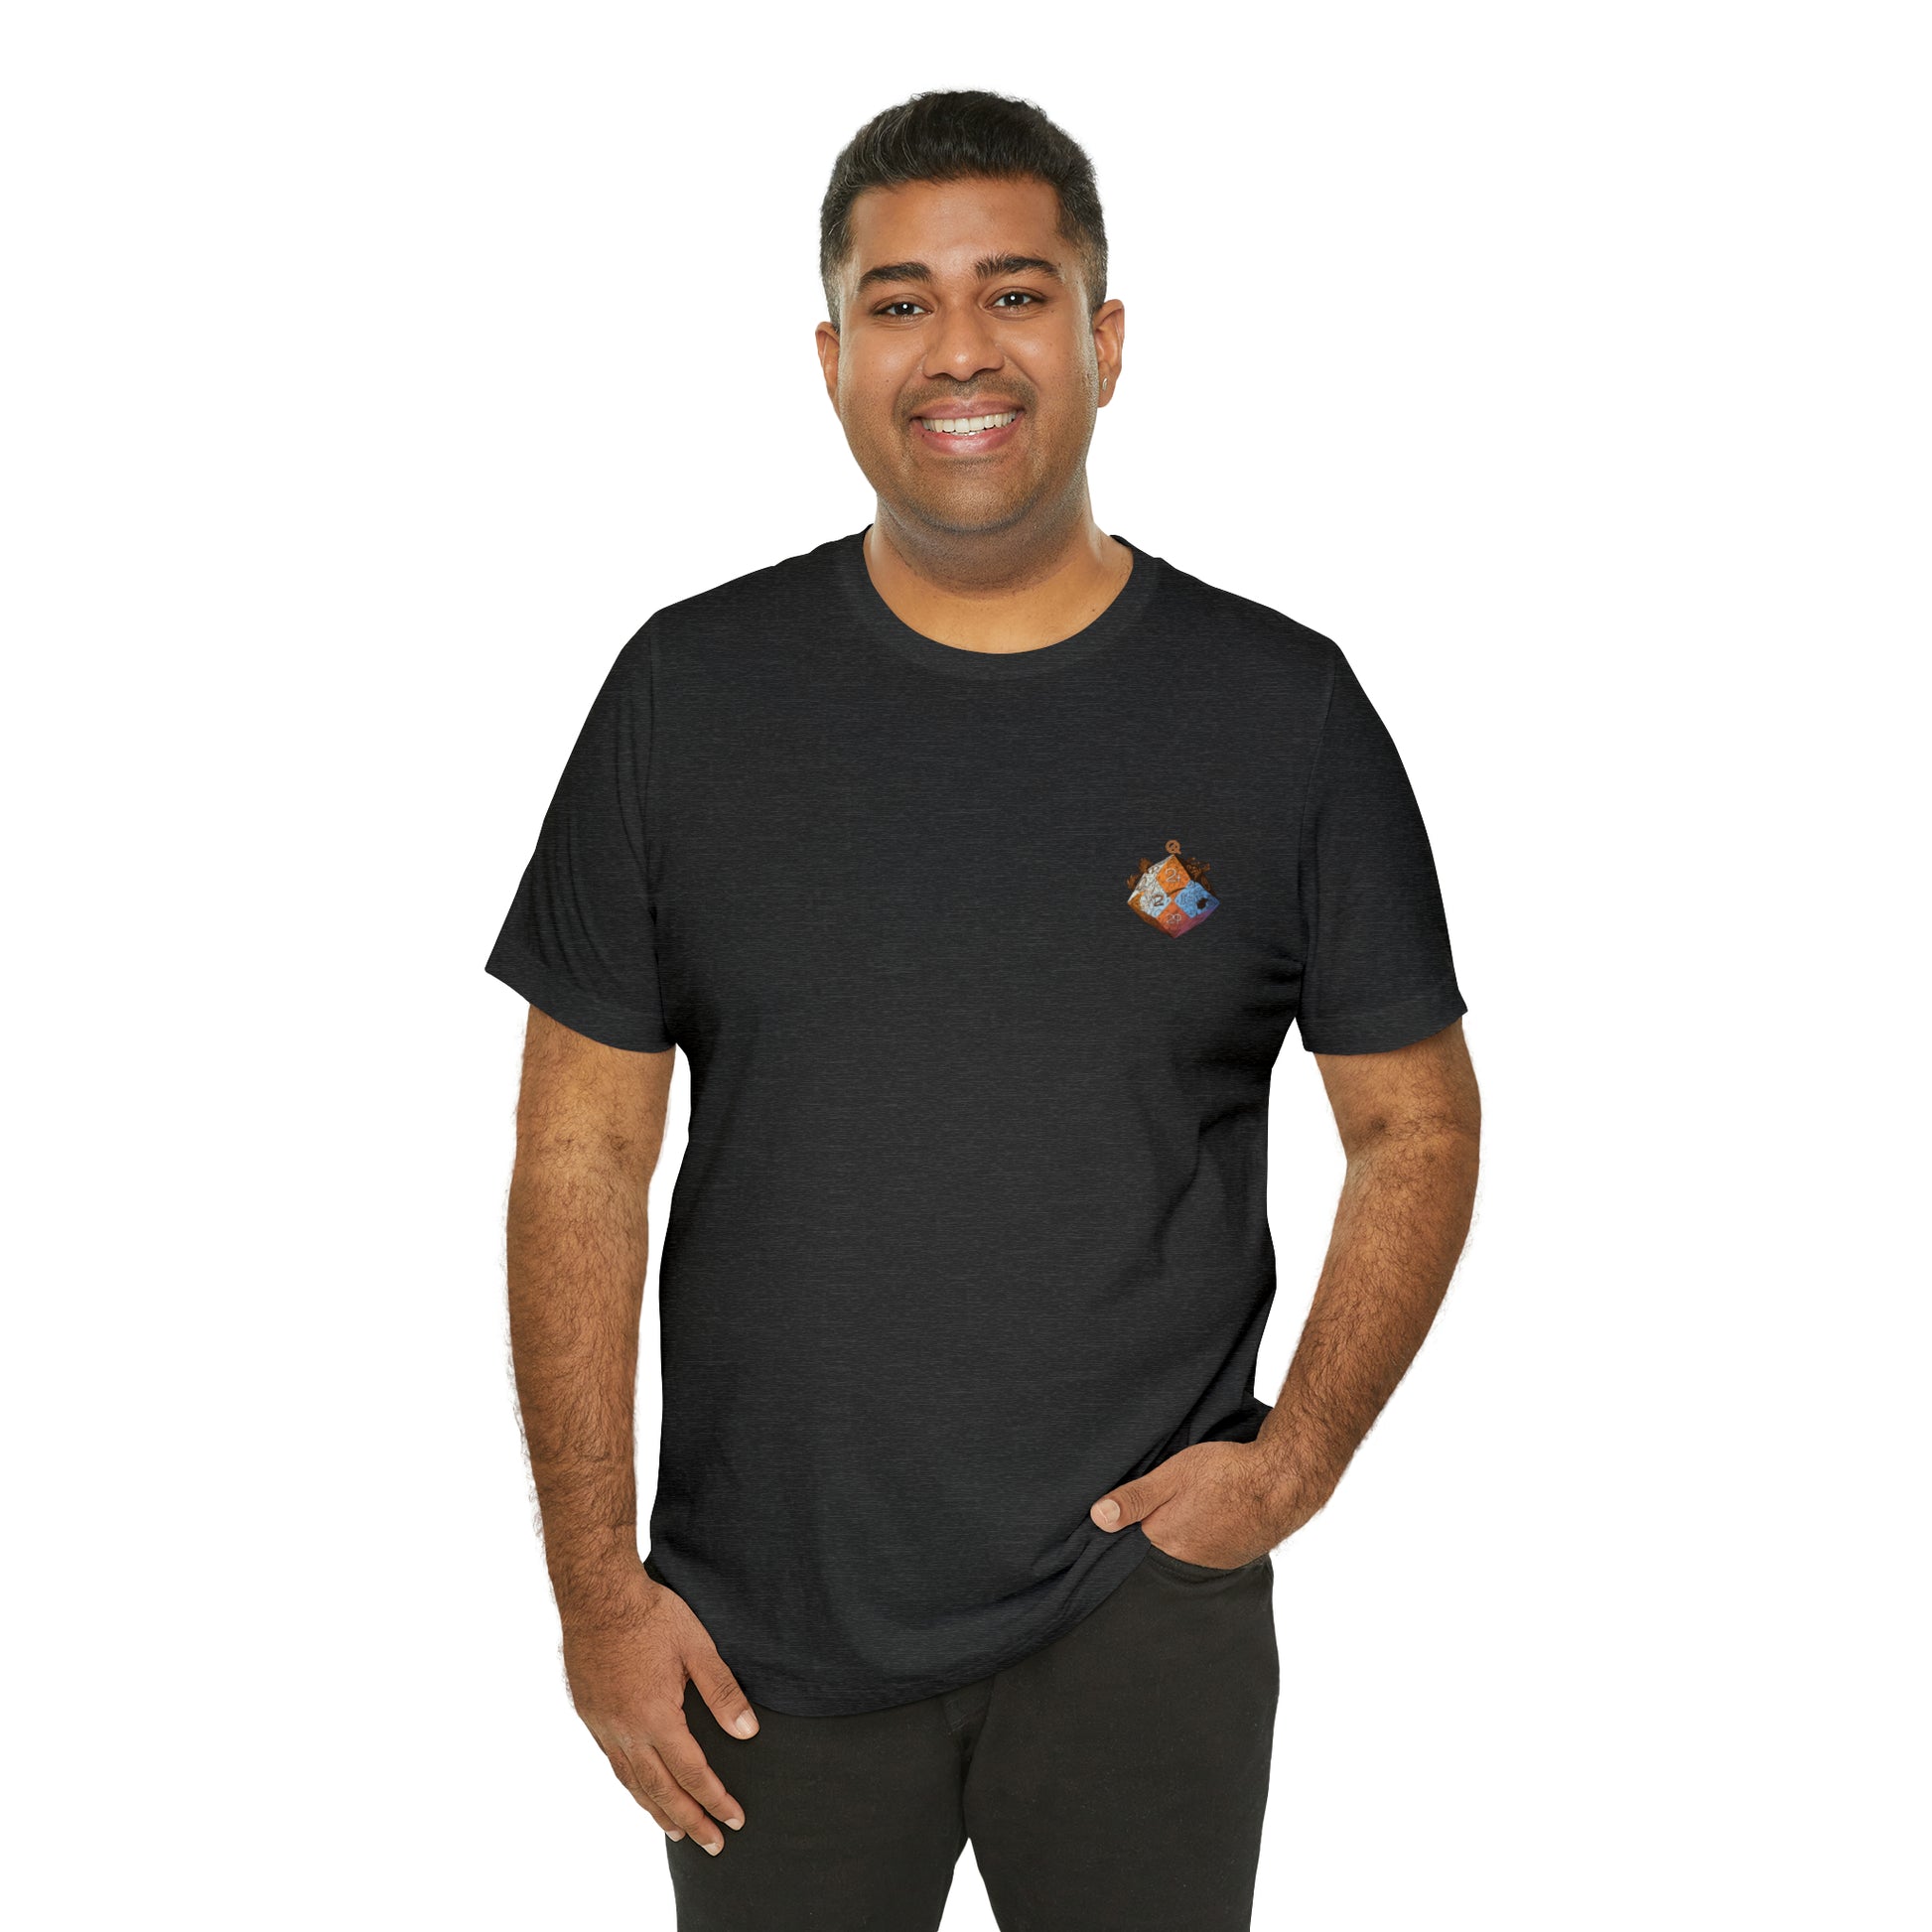 dark-grey-heather-quest-thread-tee-shirt-with-small-orange-blue-d20-dice-on-left-chest-of-shirt